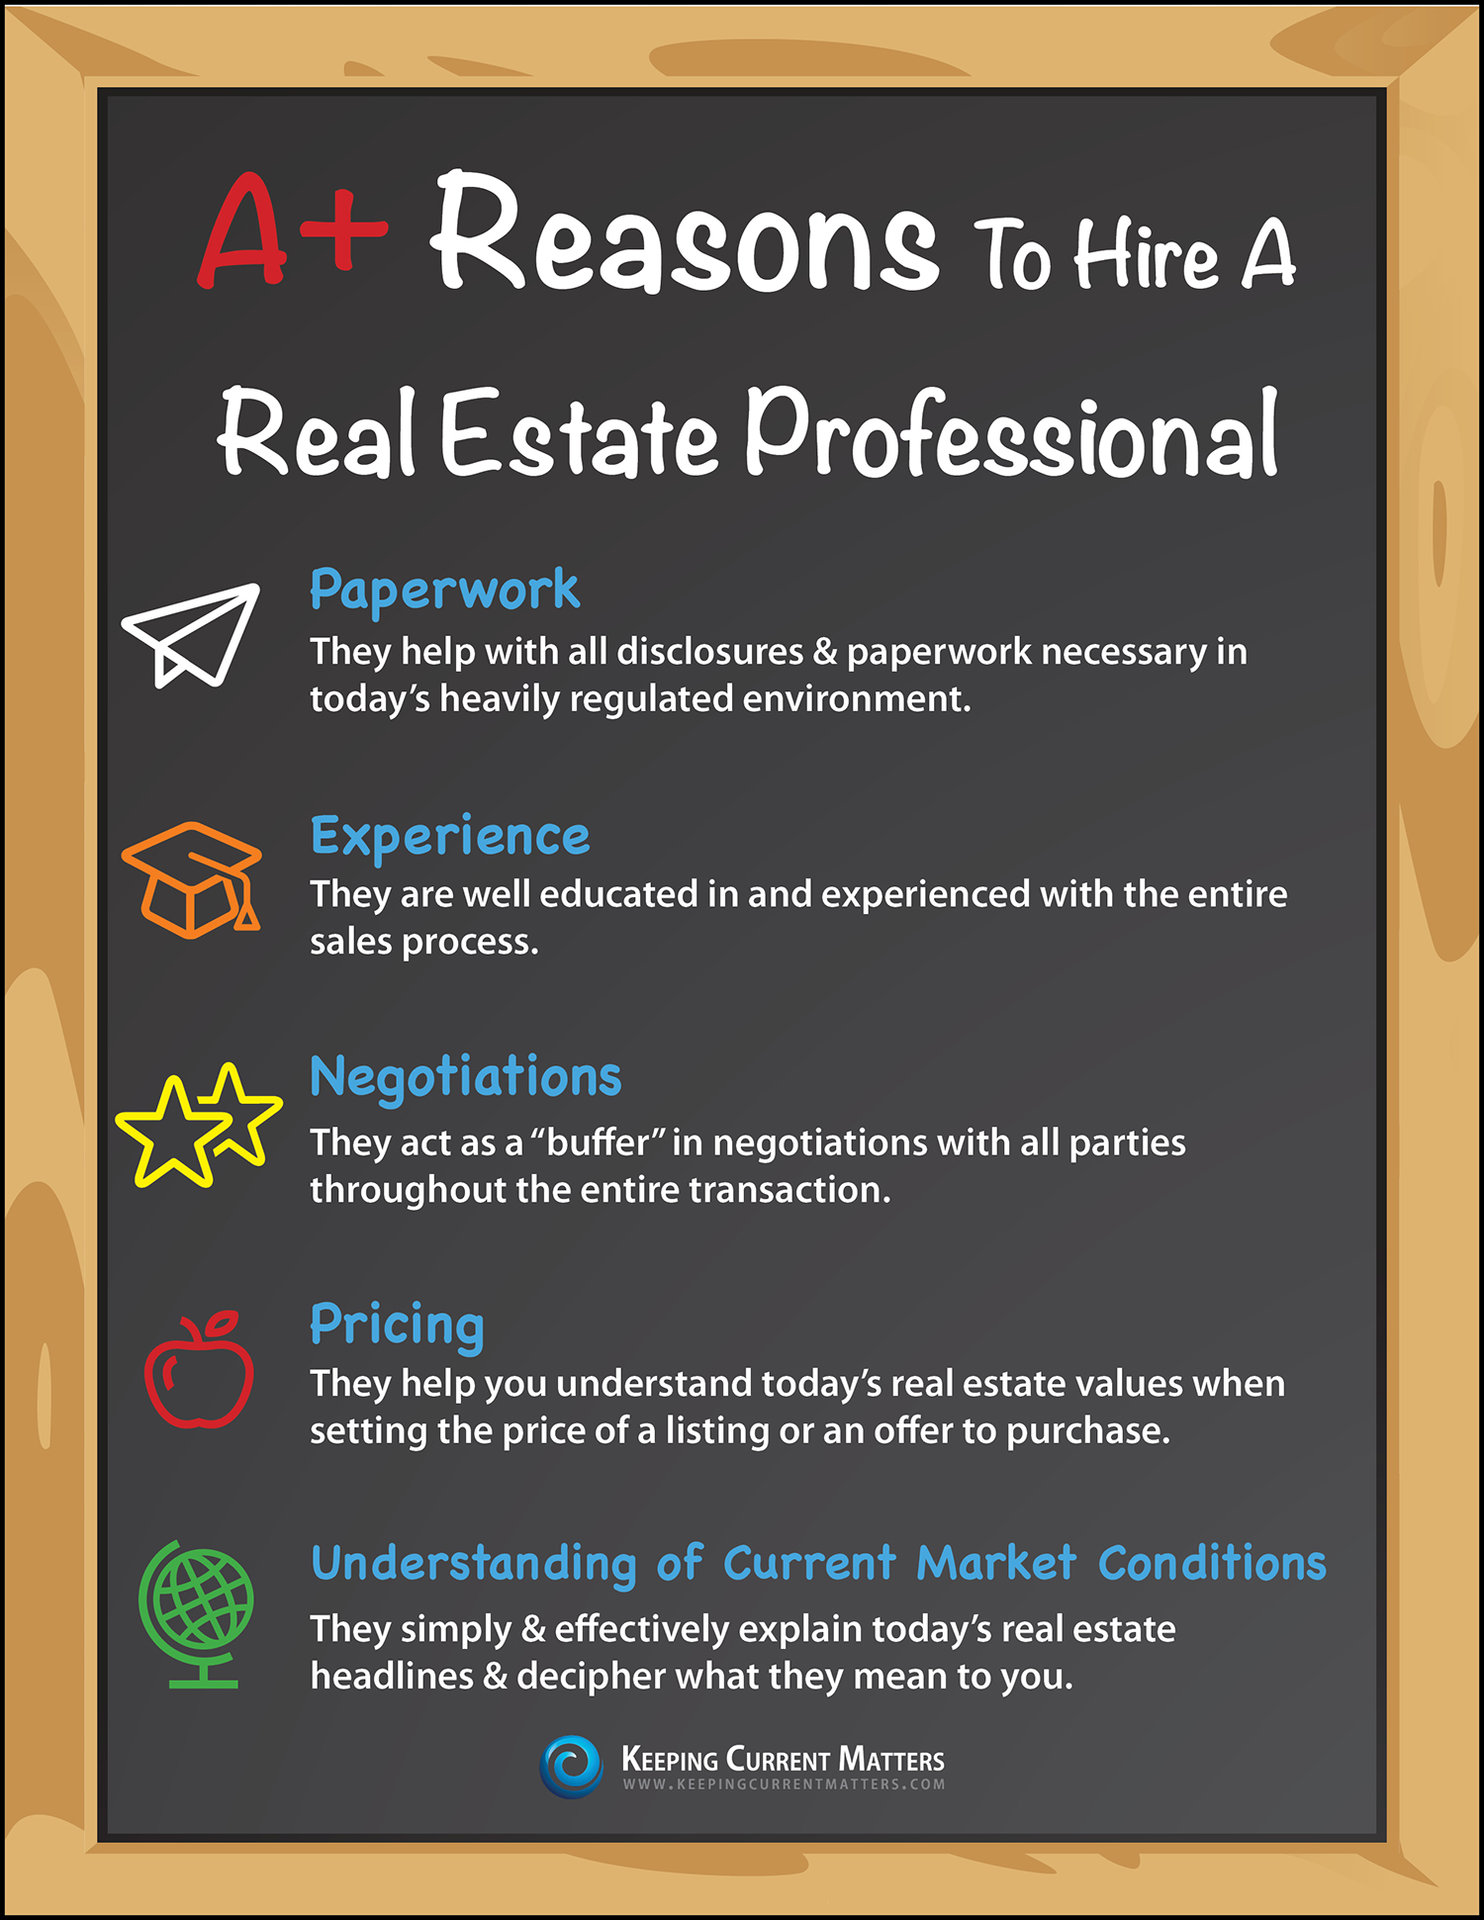 A+ Reasons To Hire A Real Estate Professional [INFOGRAPHIC] | Keeping Current Matters